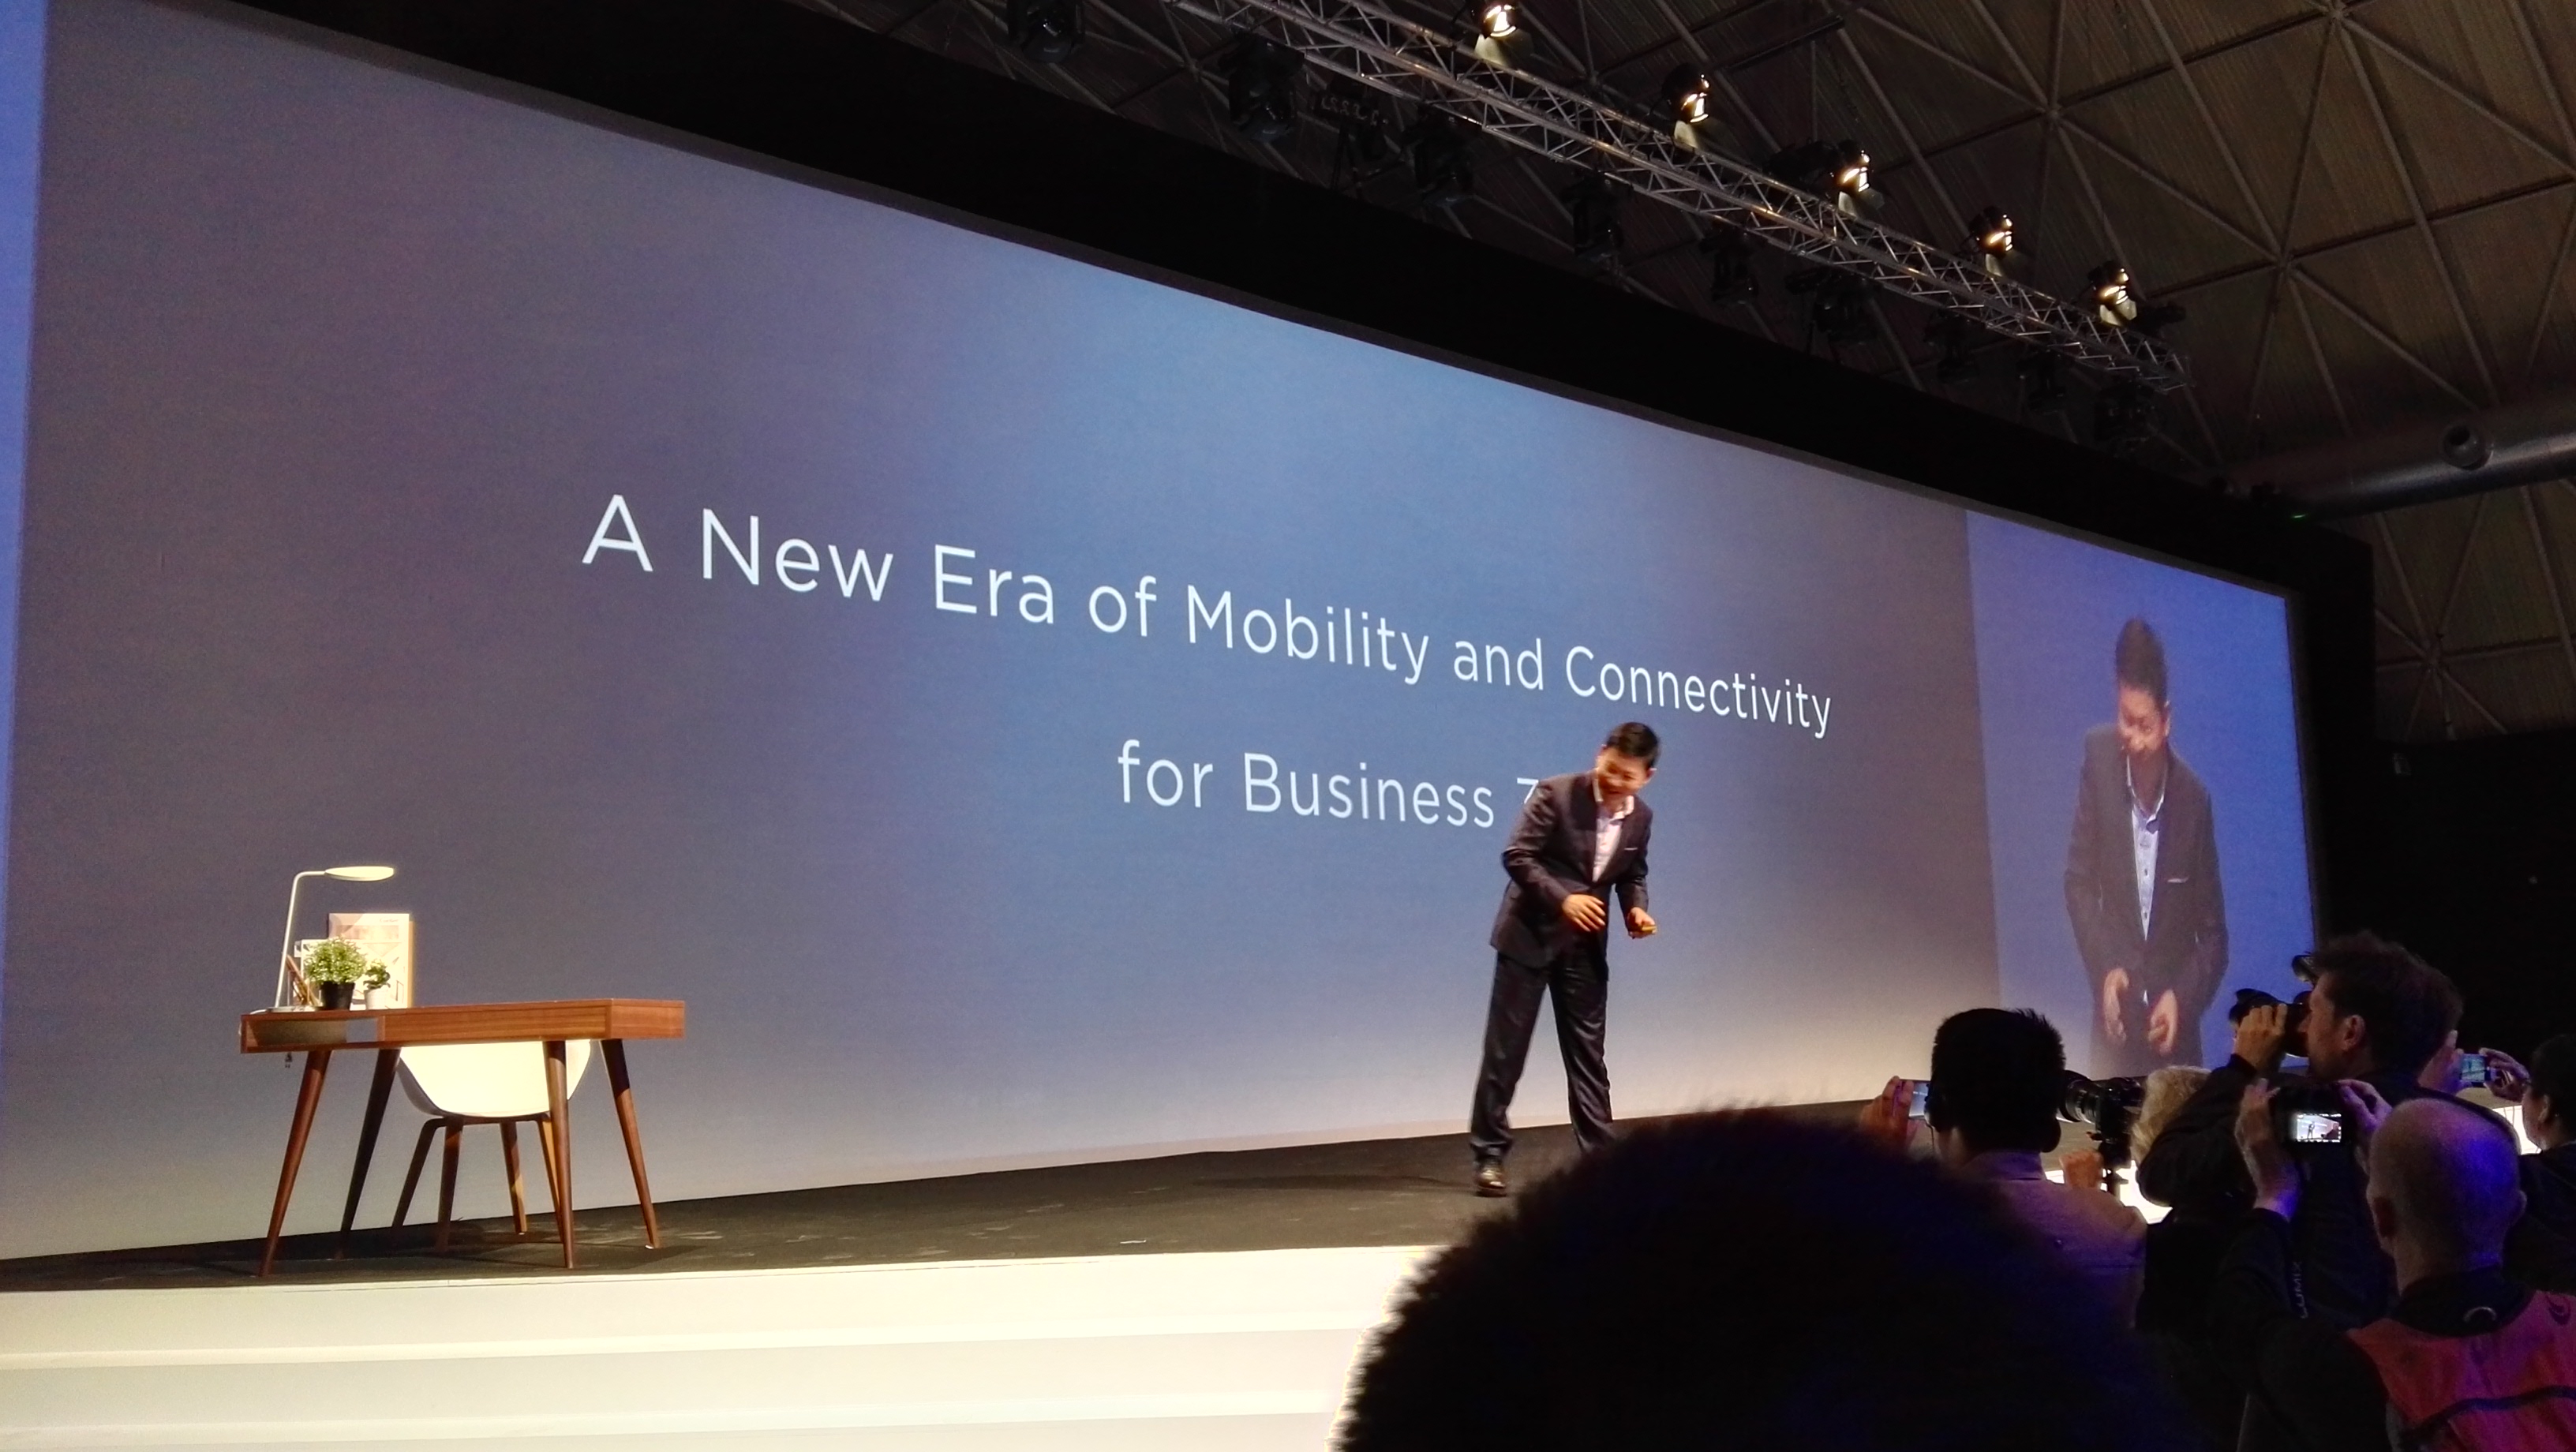 MWC 2016: Huawei Press Conference Live Blog 2PM CET